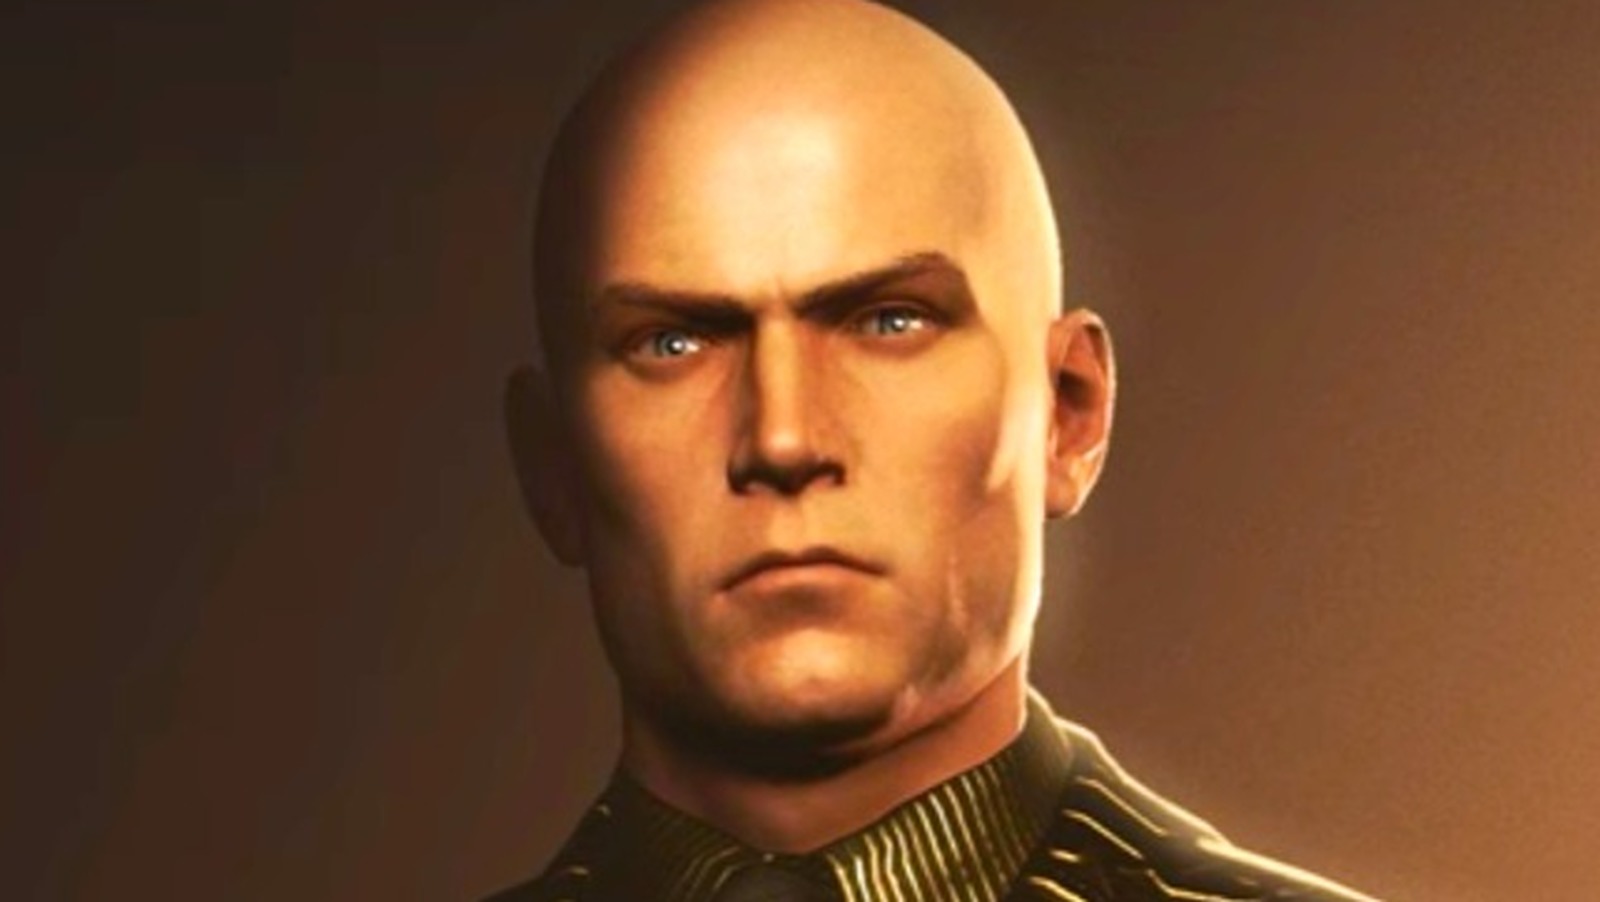 Hitman 3's Final Seven Deadly Sins DLC Will Be Released Tuesday